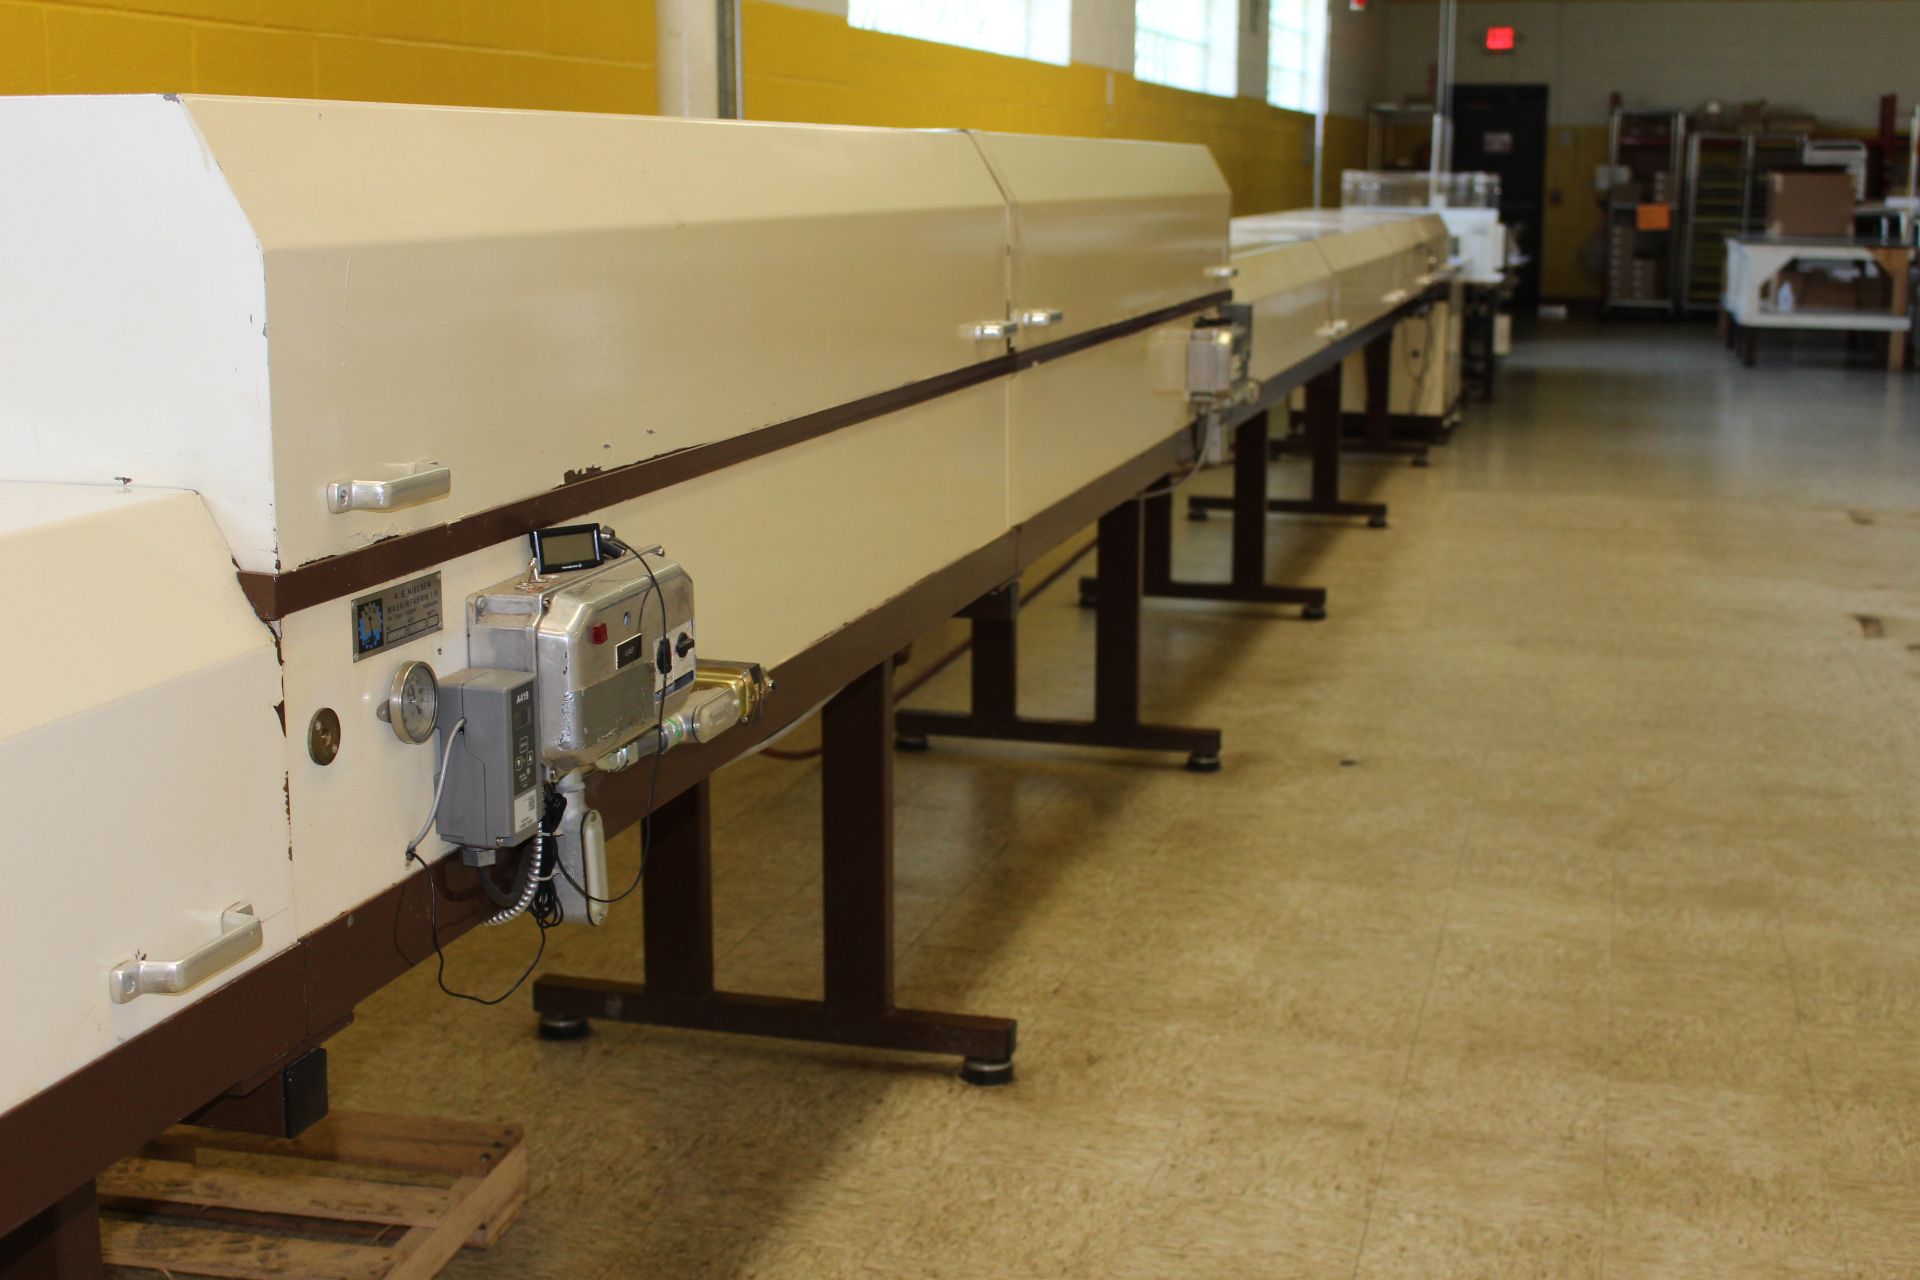 Nielsen 20" Double Enrobing Line with 6-ft long wire mesh infeed conveyor, Enrober with flow pan, - Image 10 of 14